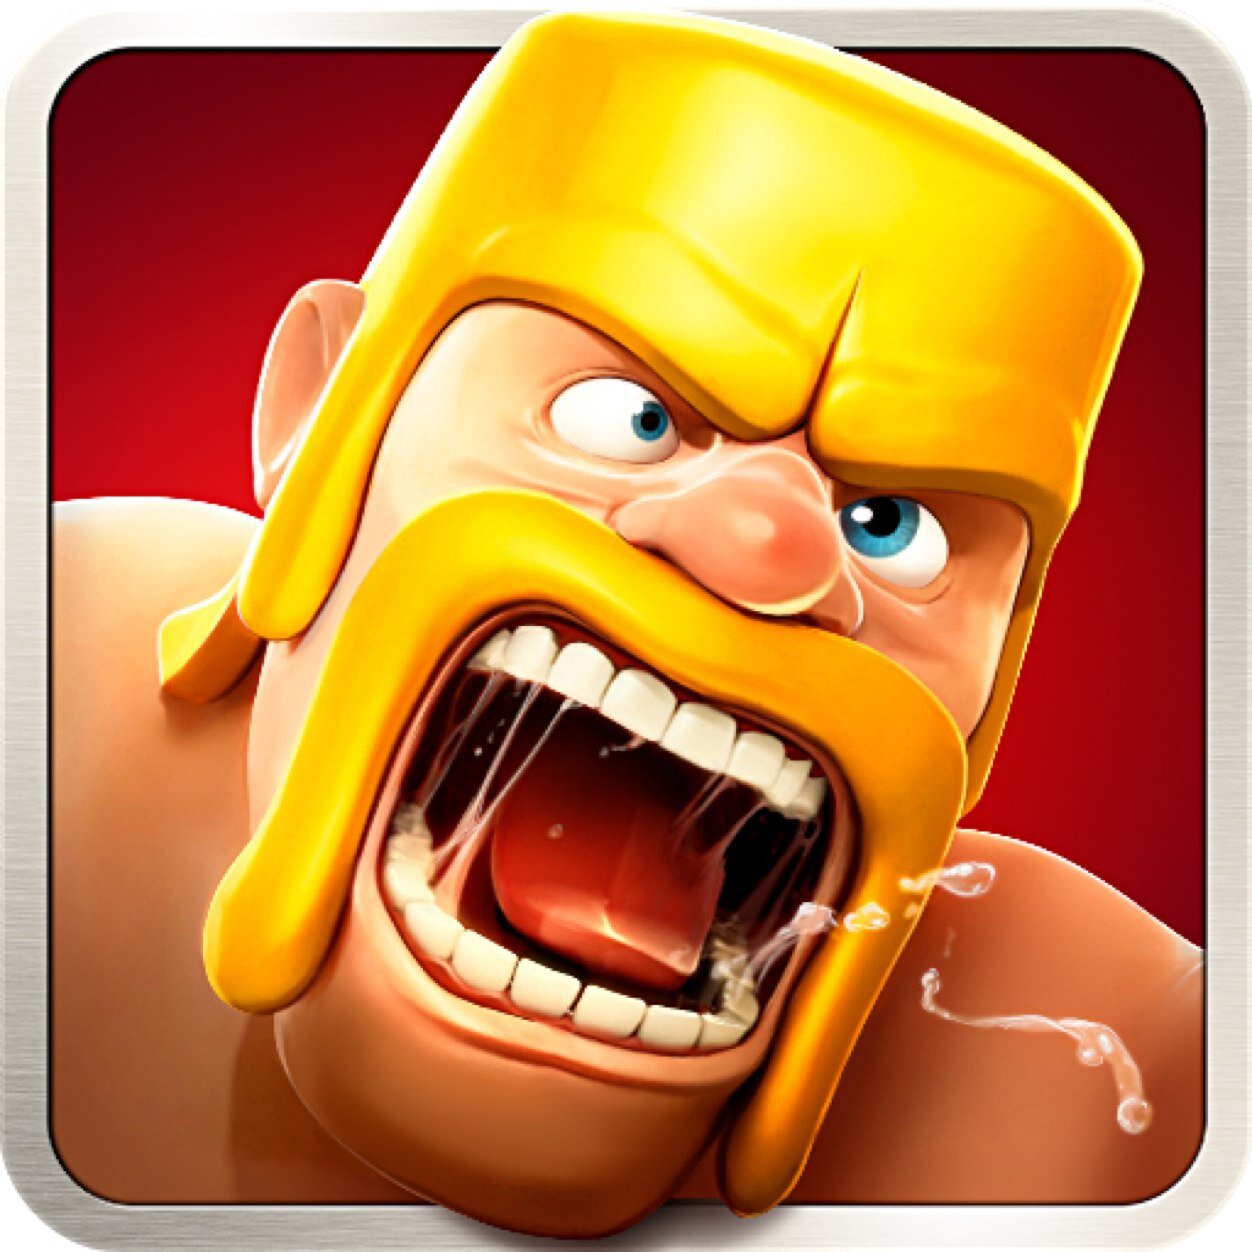 Your source for the latest Clash of Clans information, video's, tips & tricks and much much more! #clashofclans #clashclans #followback #ifollowback